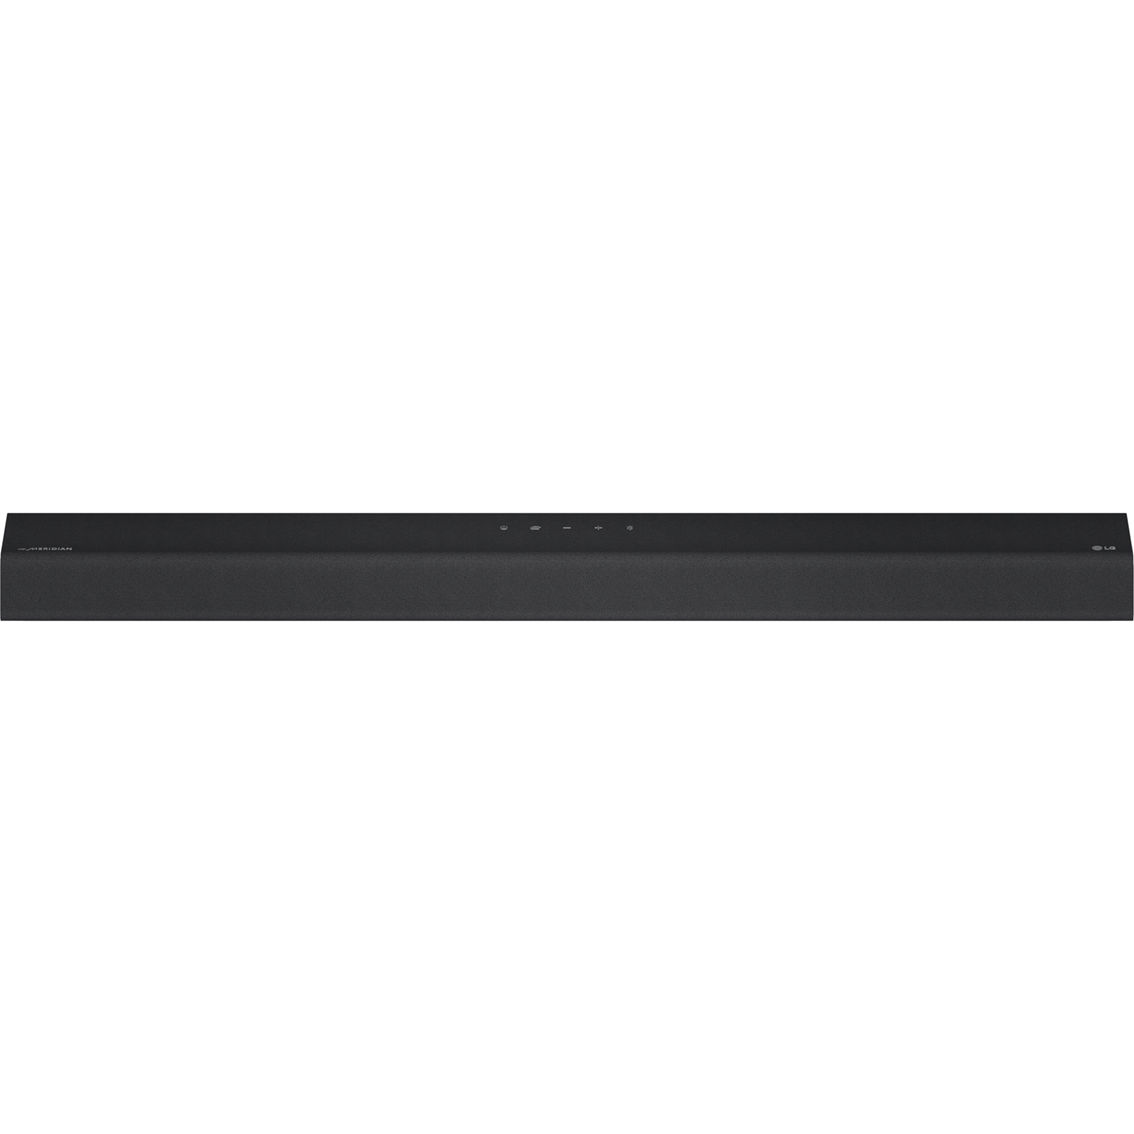 LG S65Q 3.1 Channel 420W High Res Sound Bar with DTS Virtual:X - Image 2 of 2